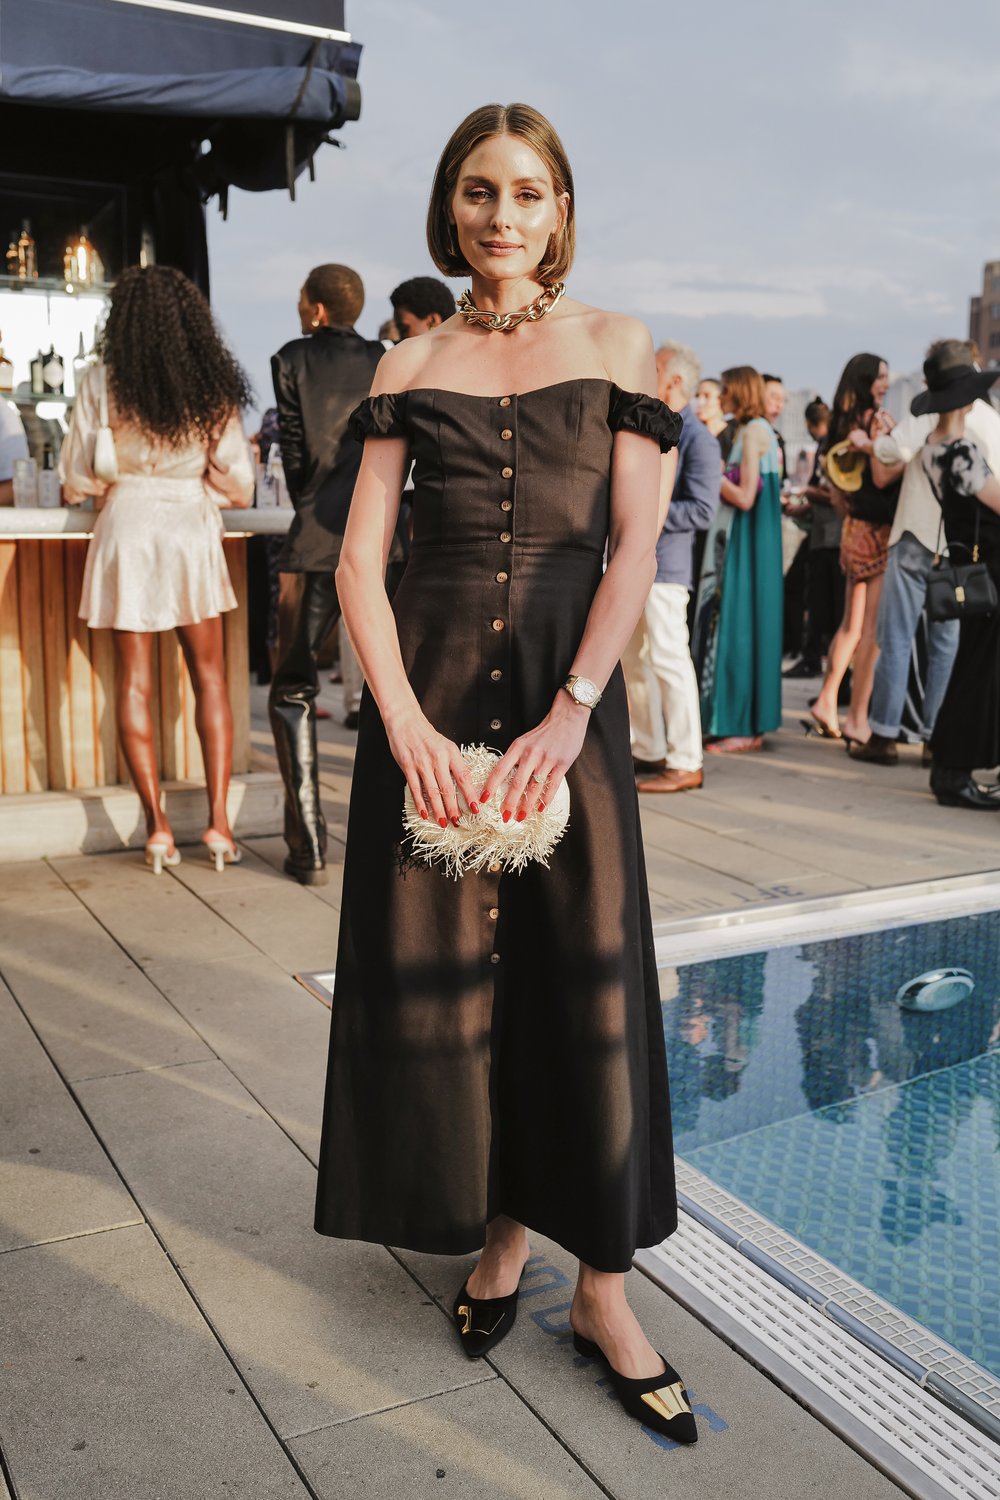    Photo: Ben Rosser/BFA.com     8/14    Olivia Palermo Attends The Australian Fashion Foundation Annual Summer Soirée in New York City on Tuesday, August 15, 2023.   